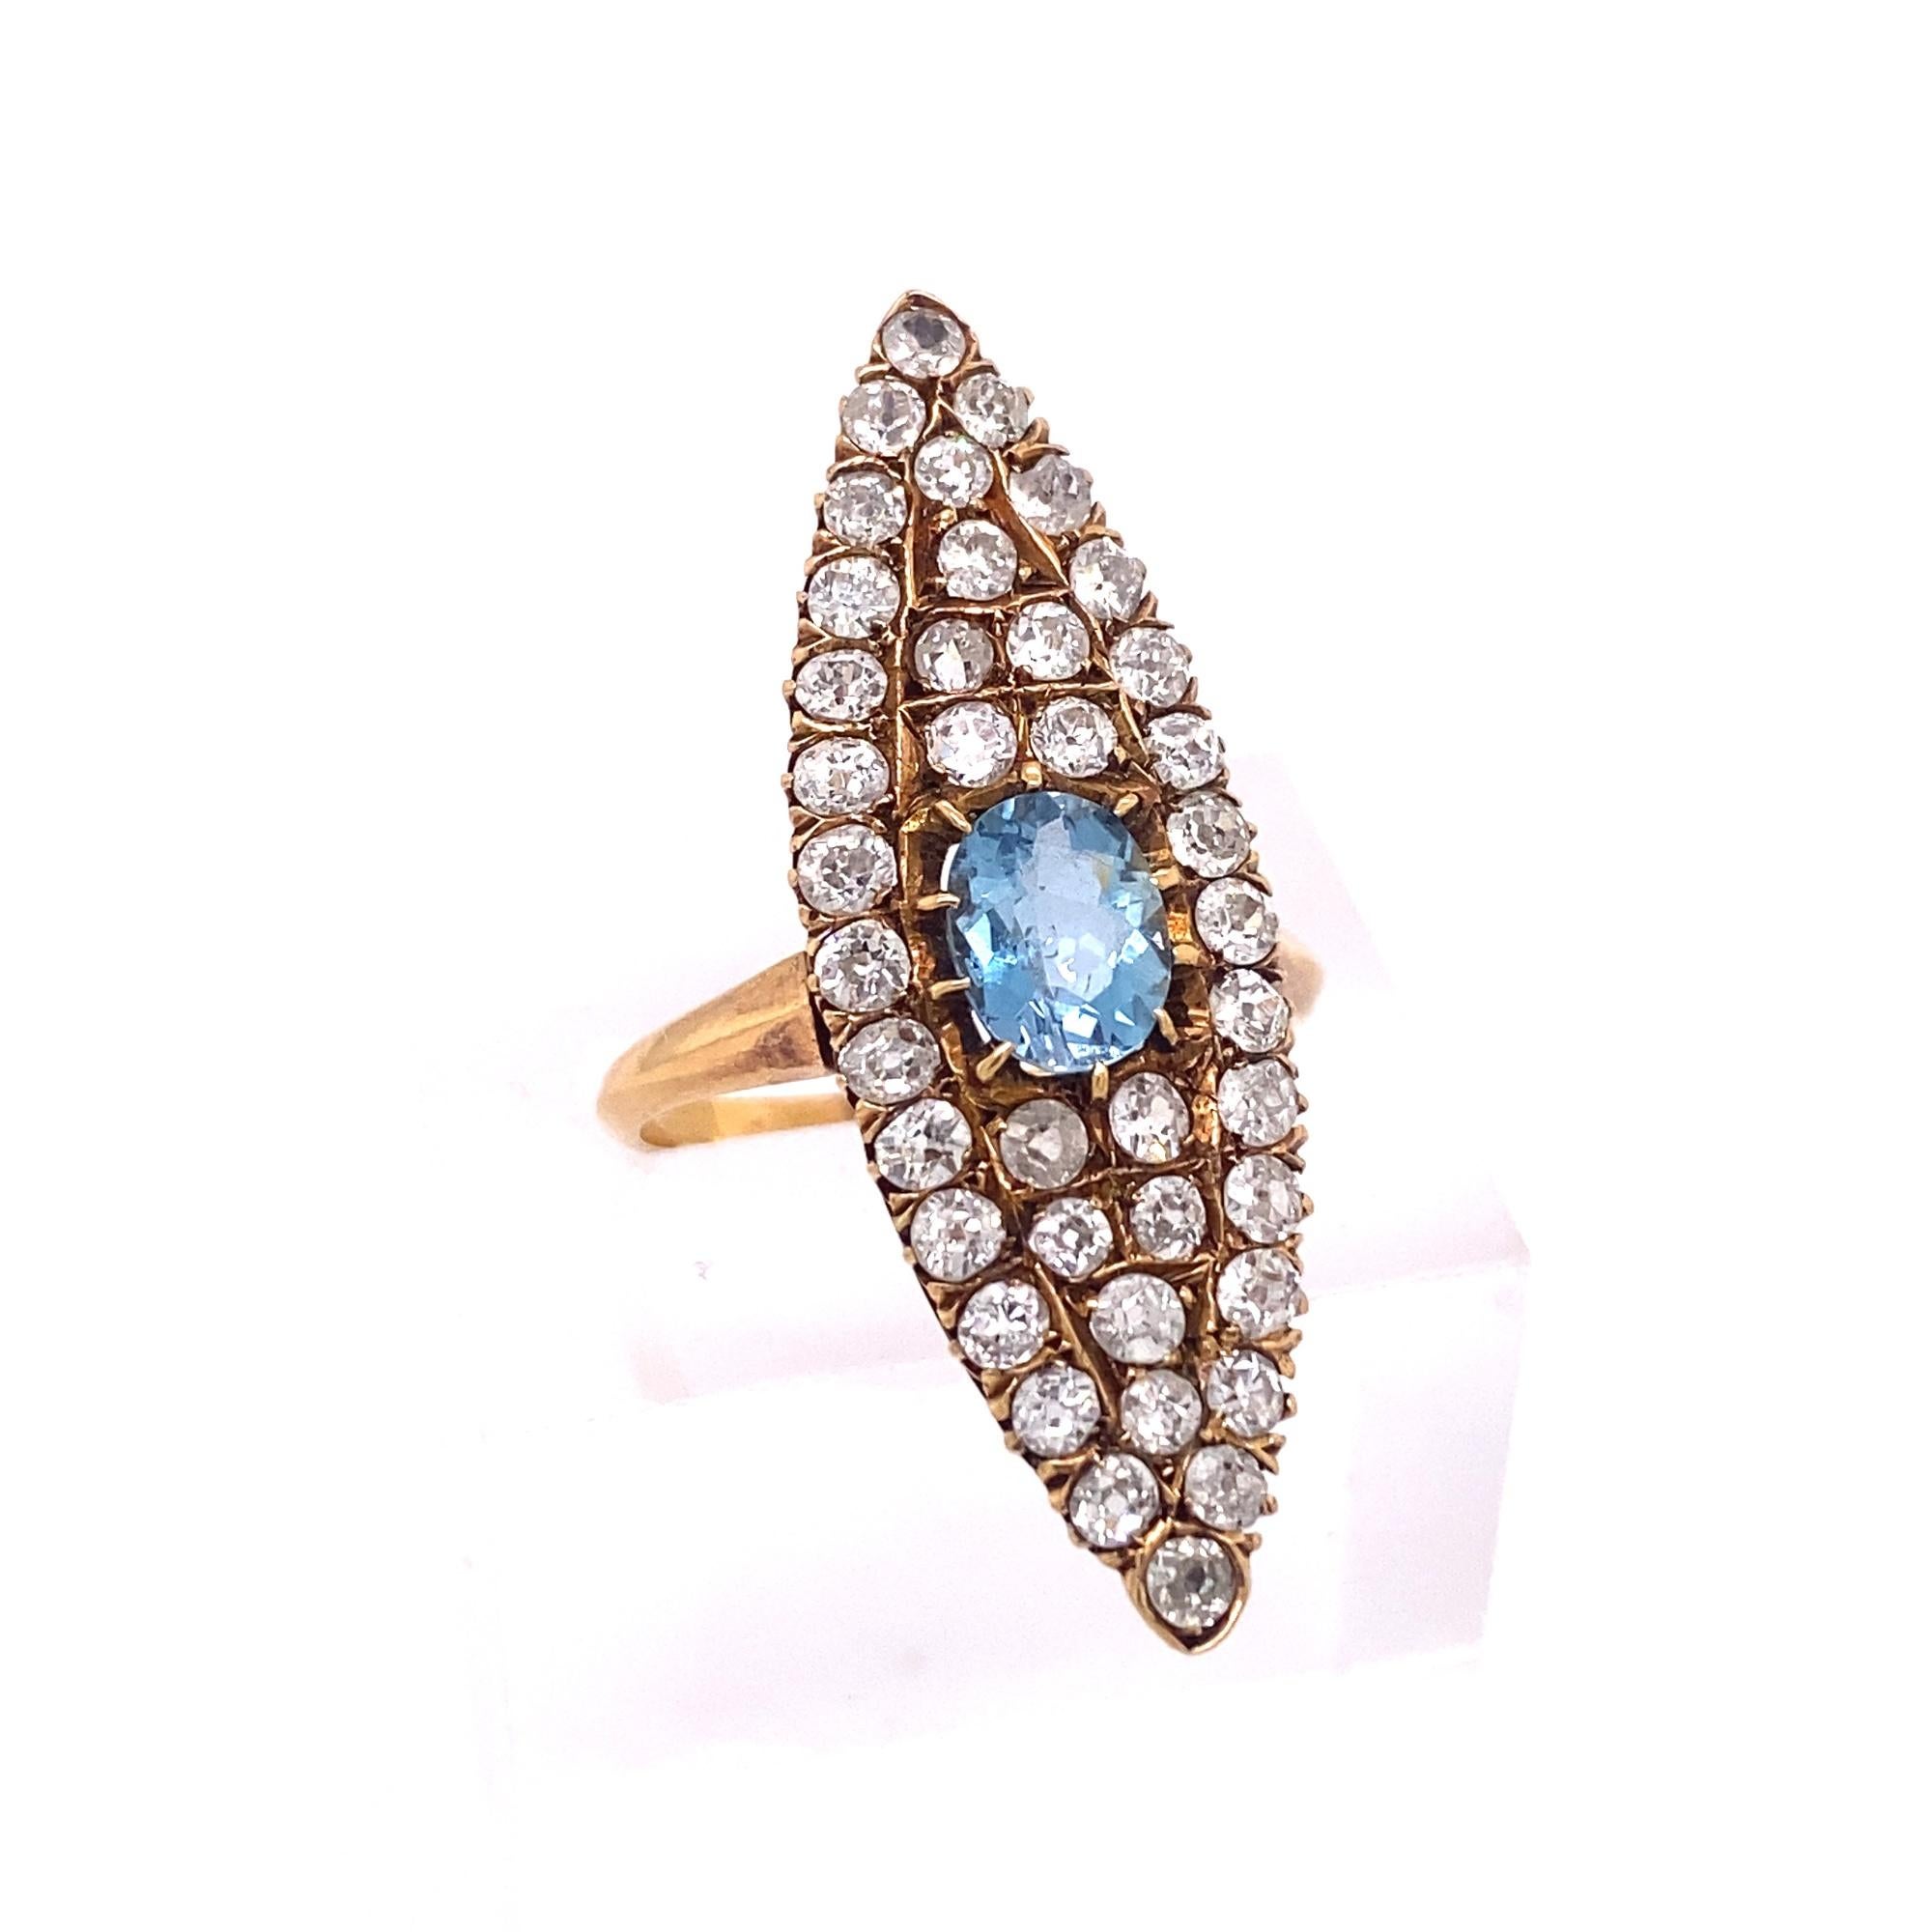 This is a beautiful original art deco ring set with old mien cut diamonds and an oval shape aquamarine. The aquamarine has amazing deep blue color and clarity it measures 7mm by 6mm. There are 40 round old mine cut diamonds they average H-I Color